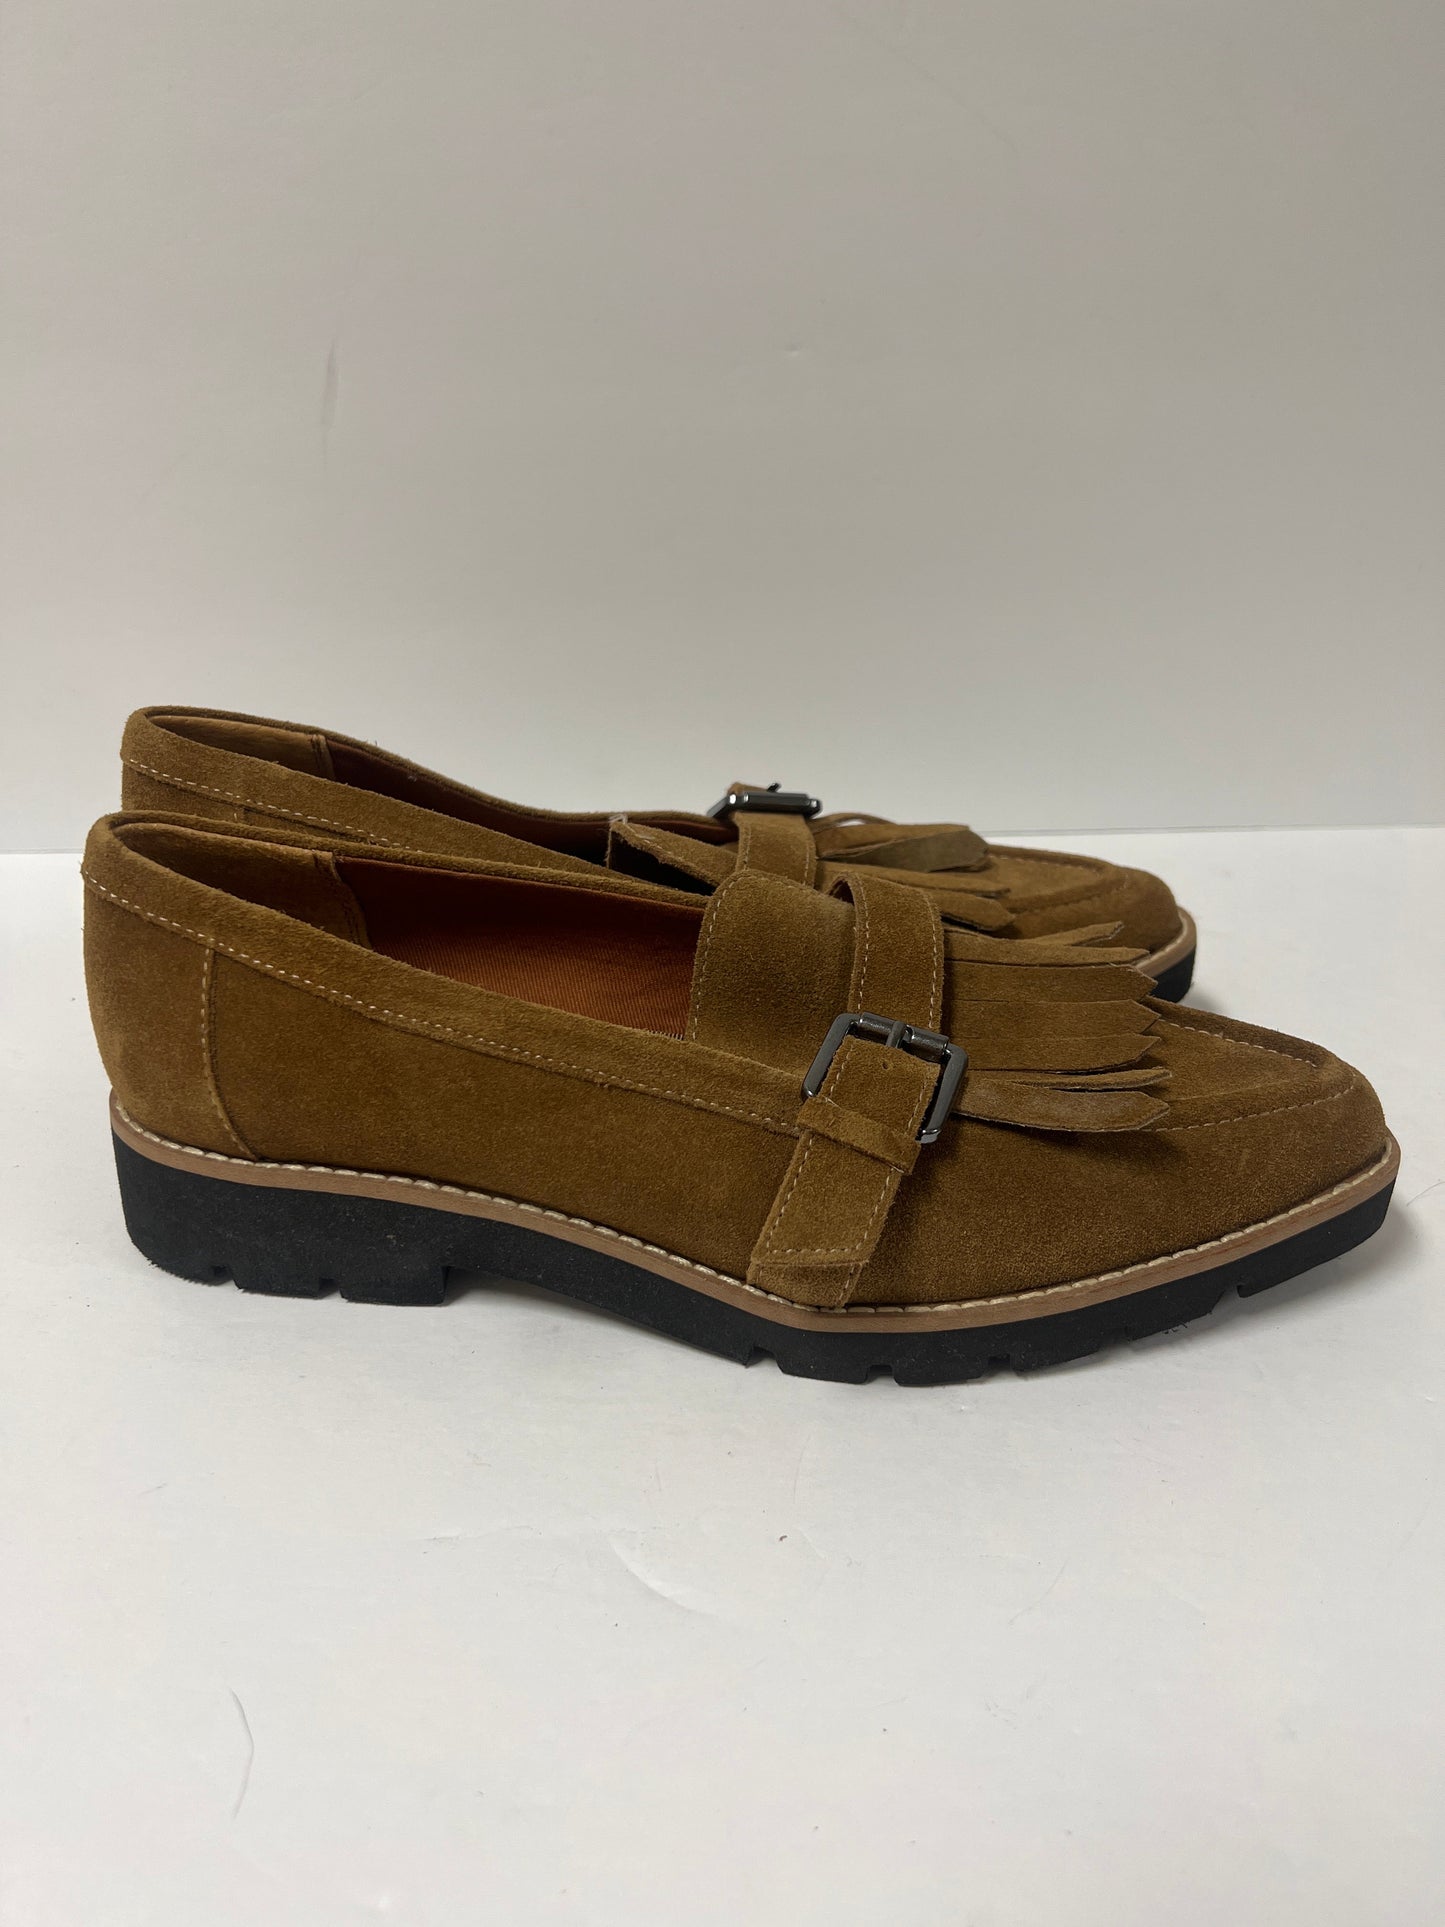 Shoes Flats Moccasin By Franco Sarto  Size: 8